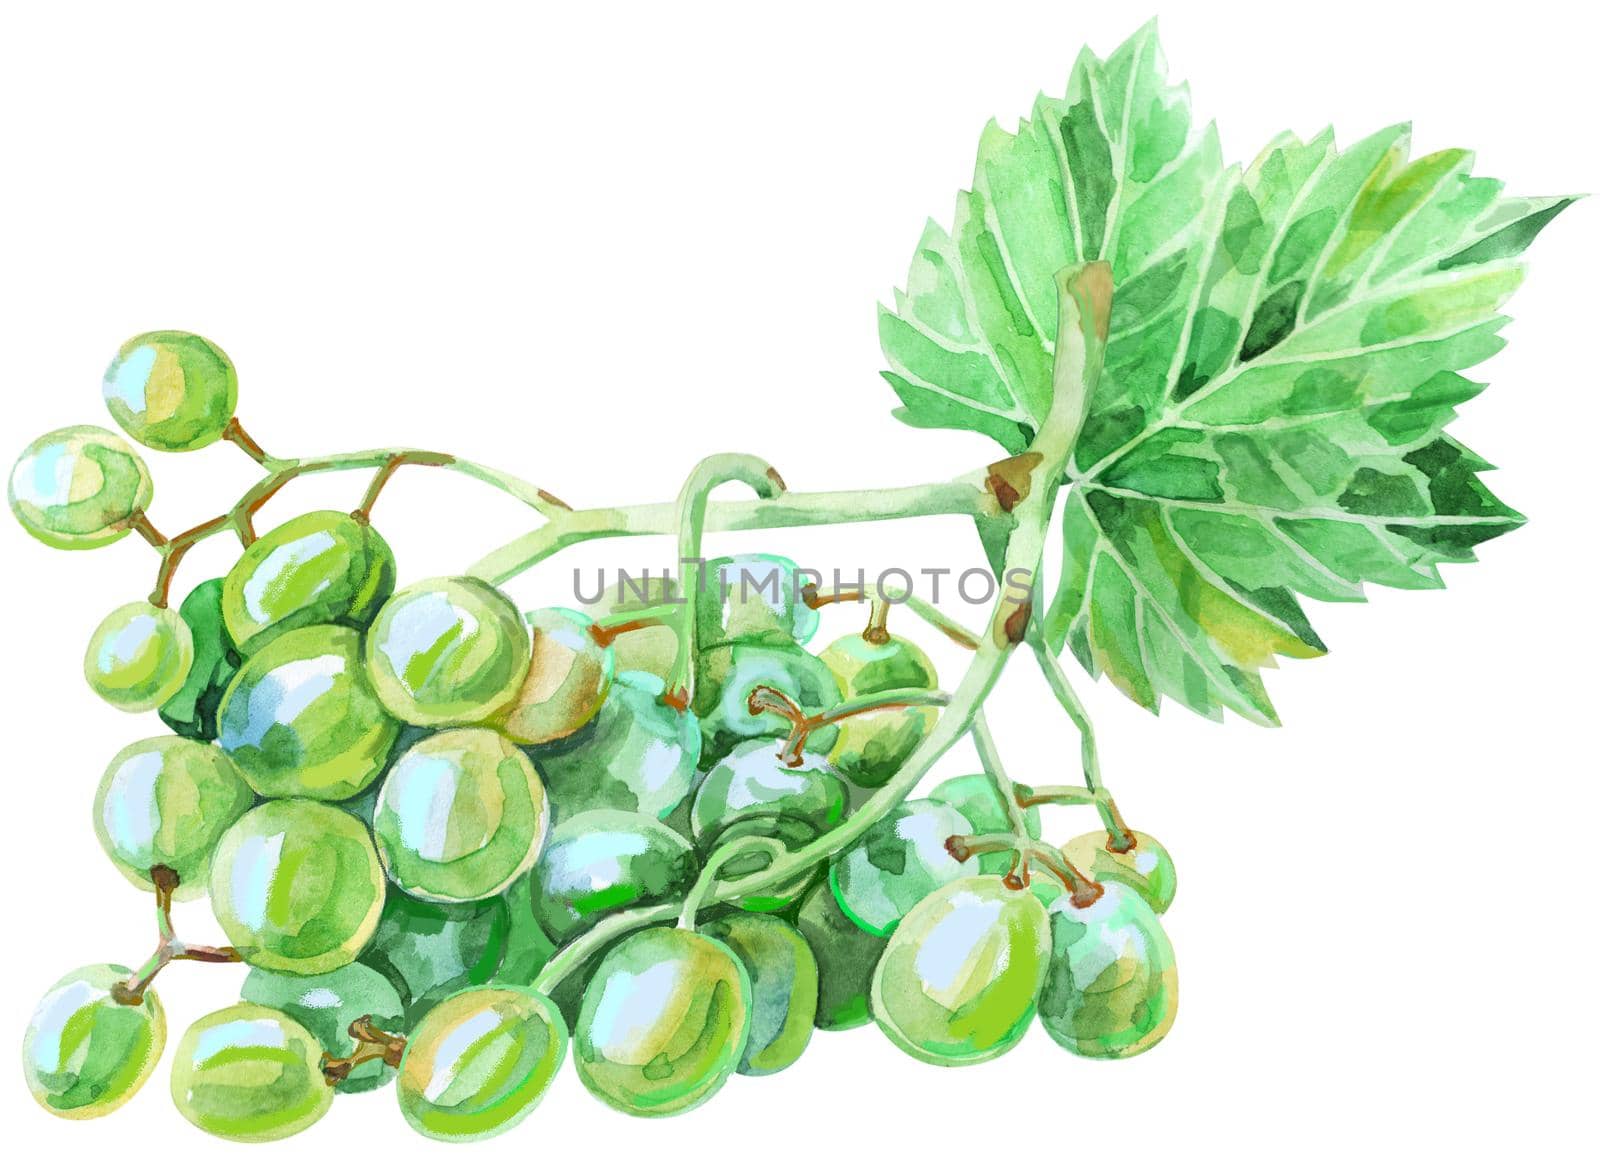 Watercolor branch green grapes, illustration isolated on white background.